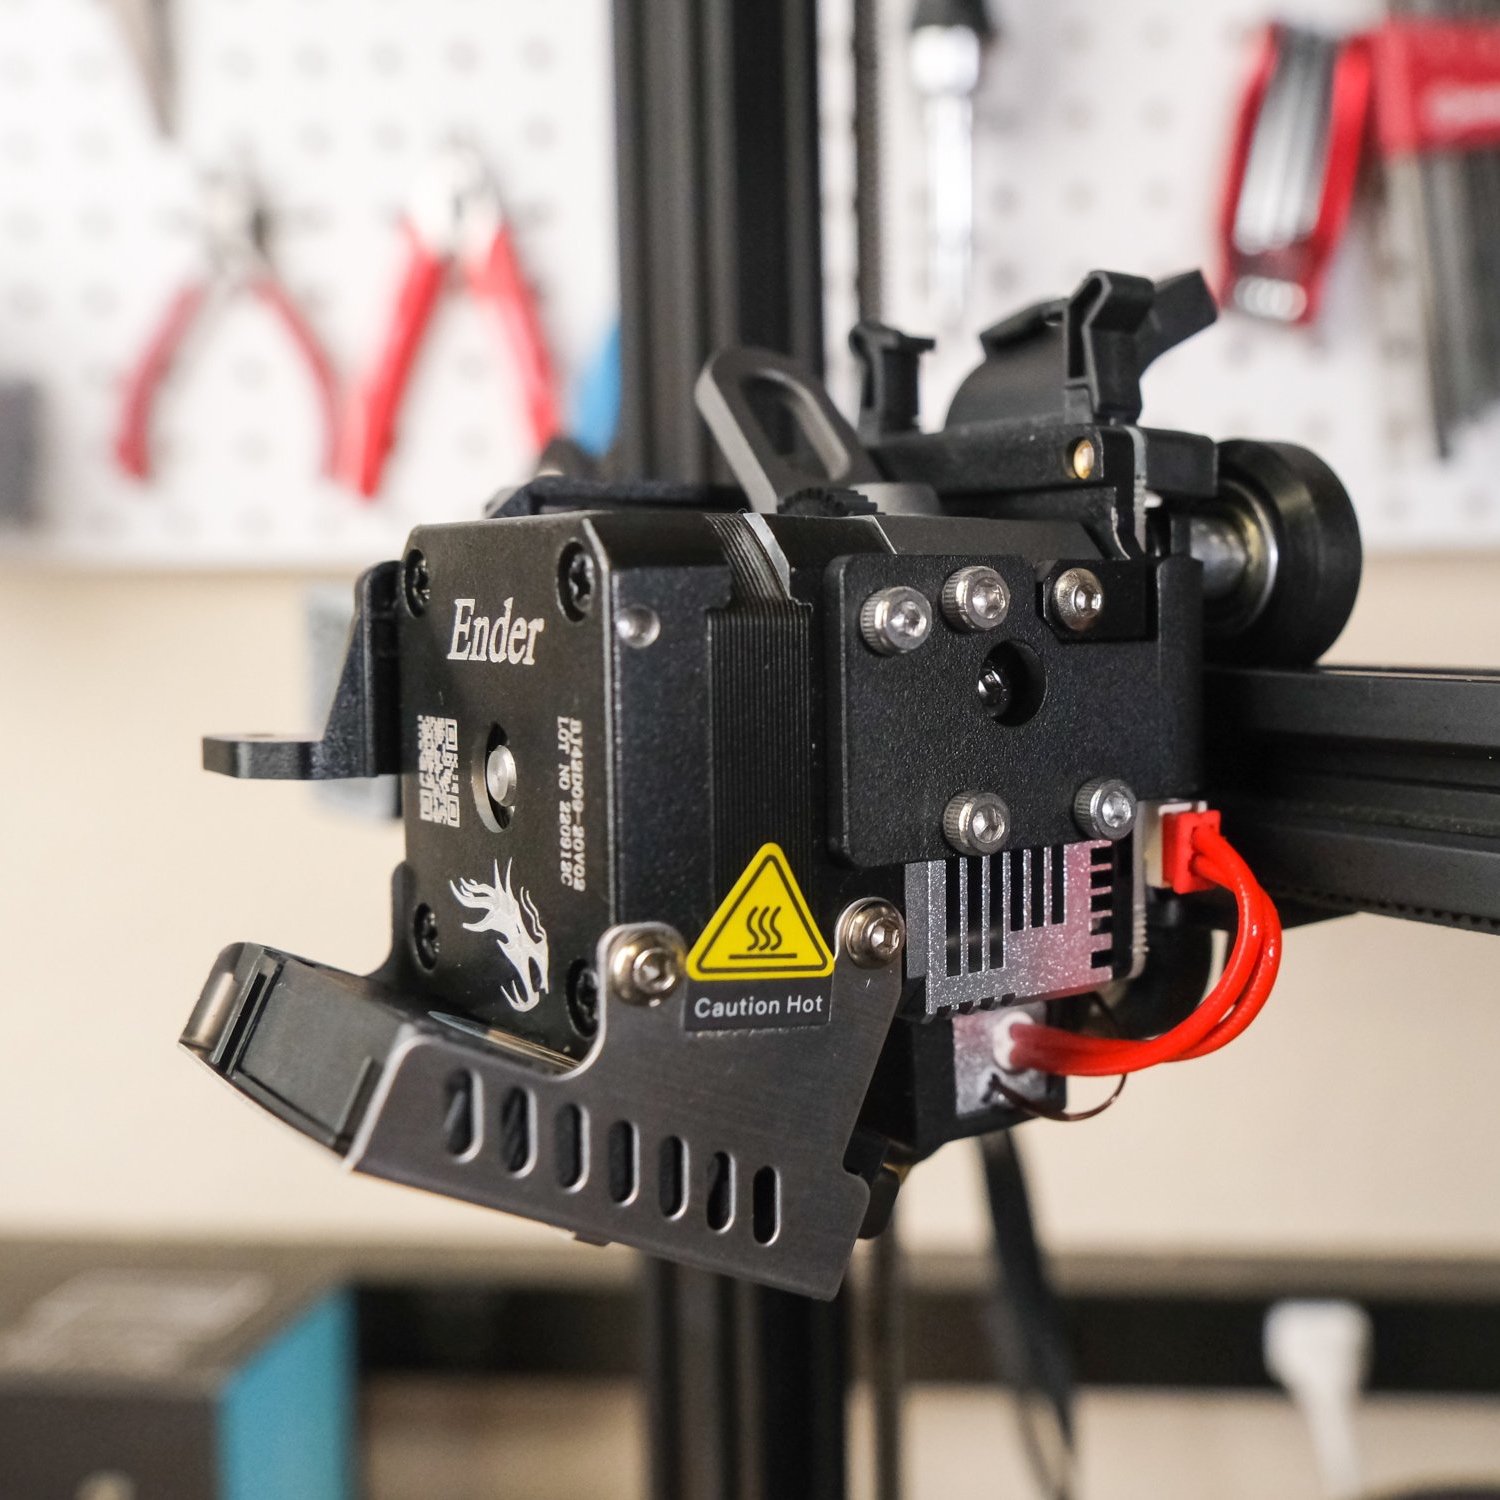 3D Printer Extruder – All You Need to Know